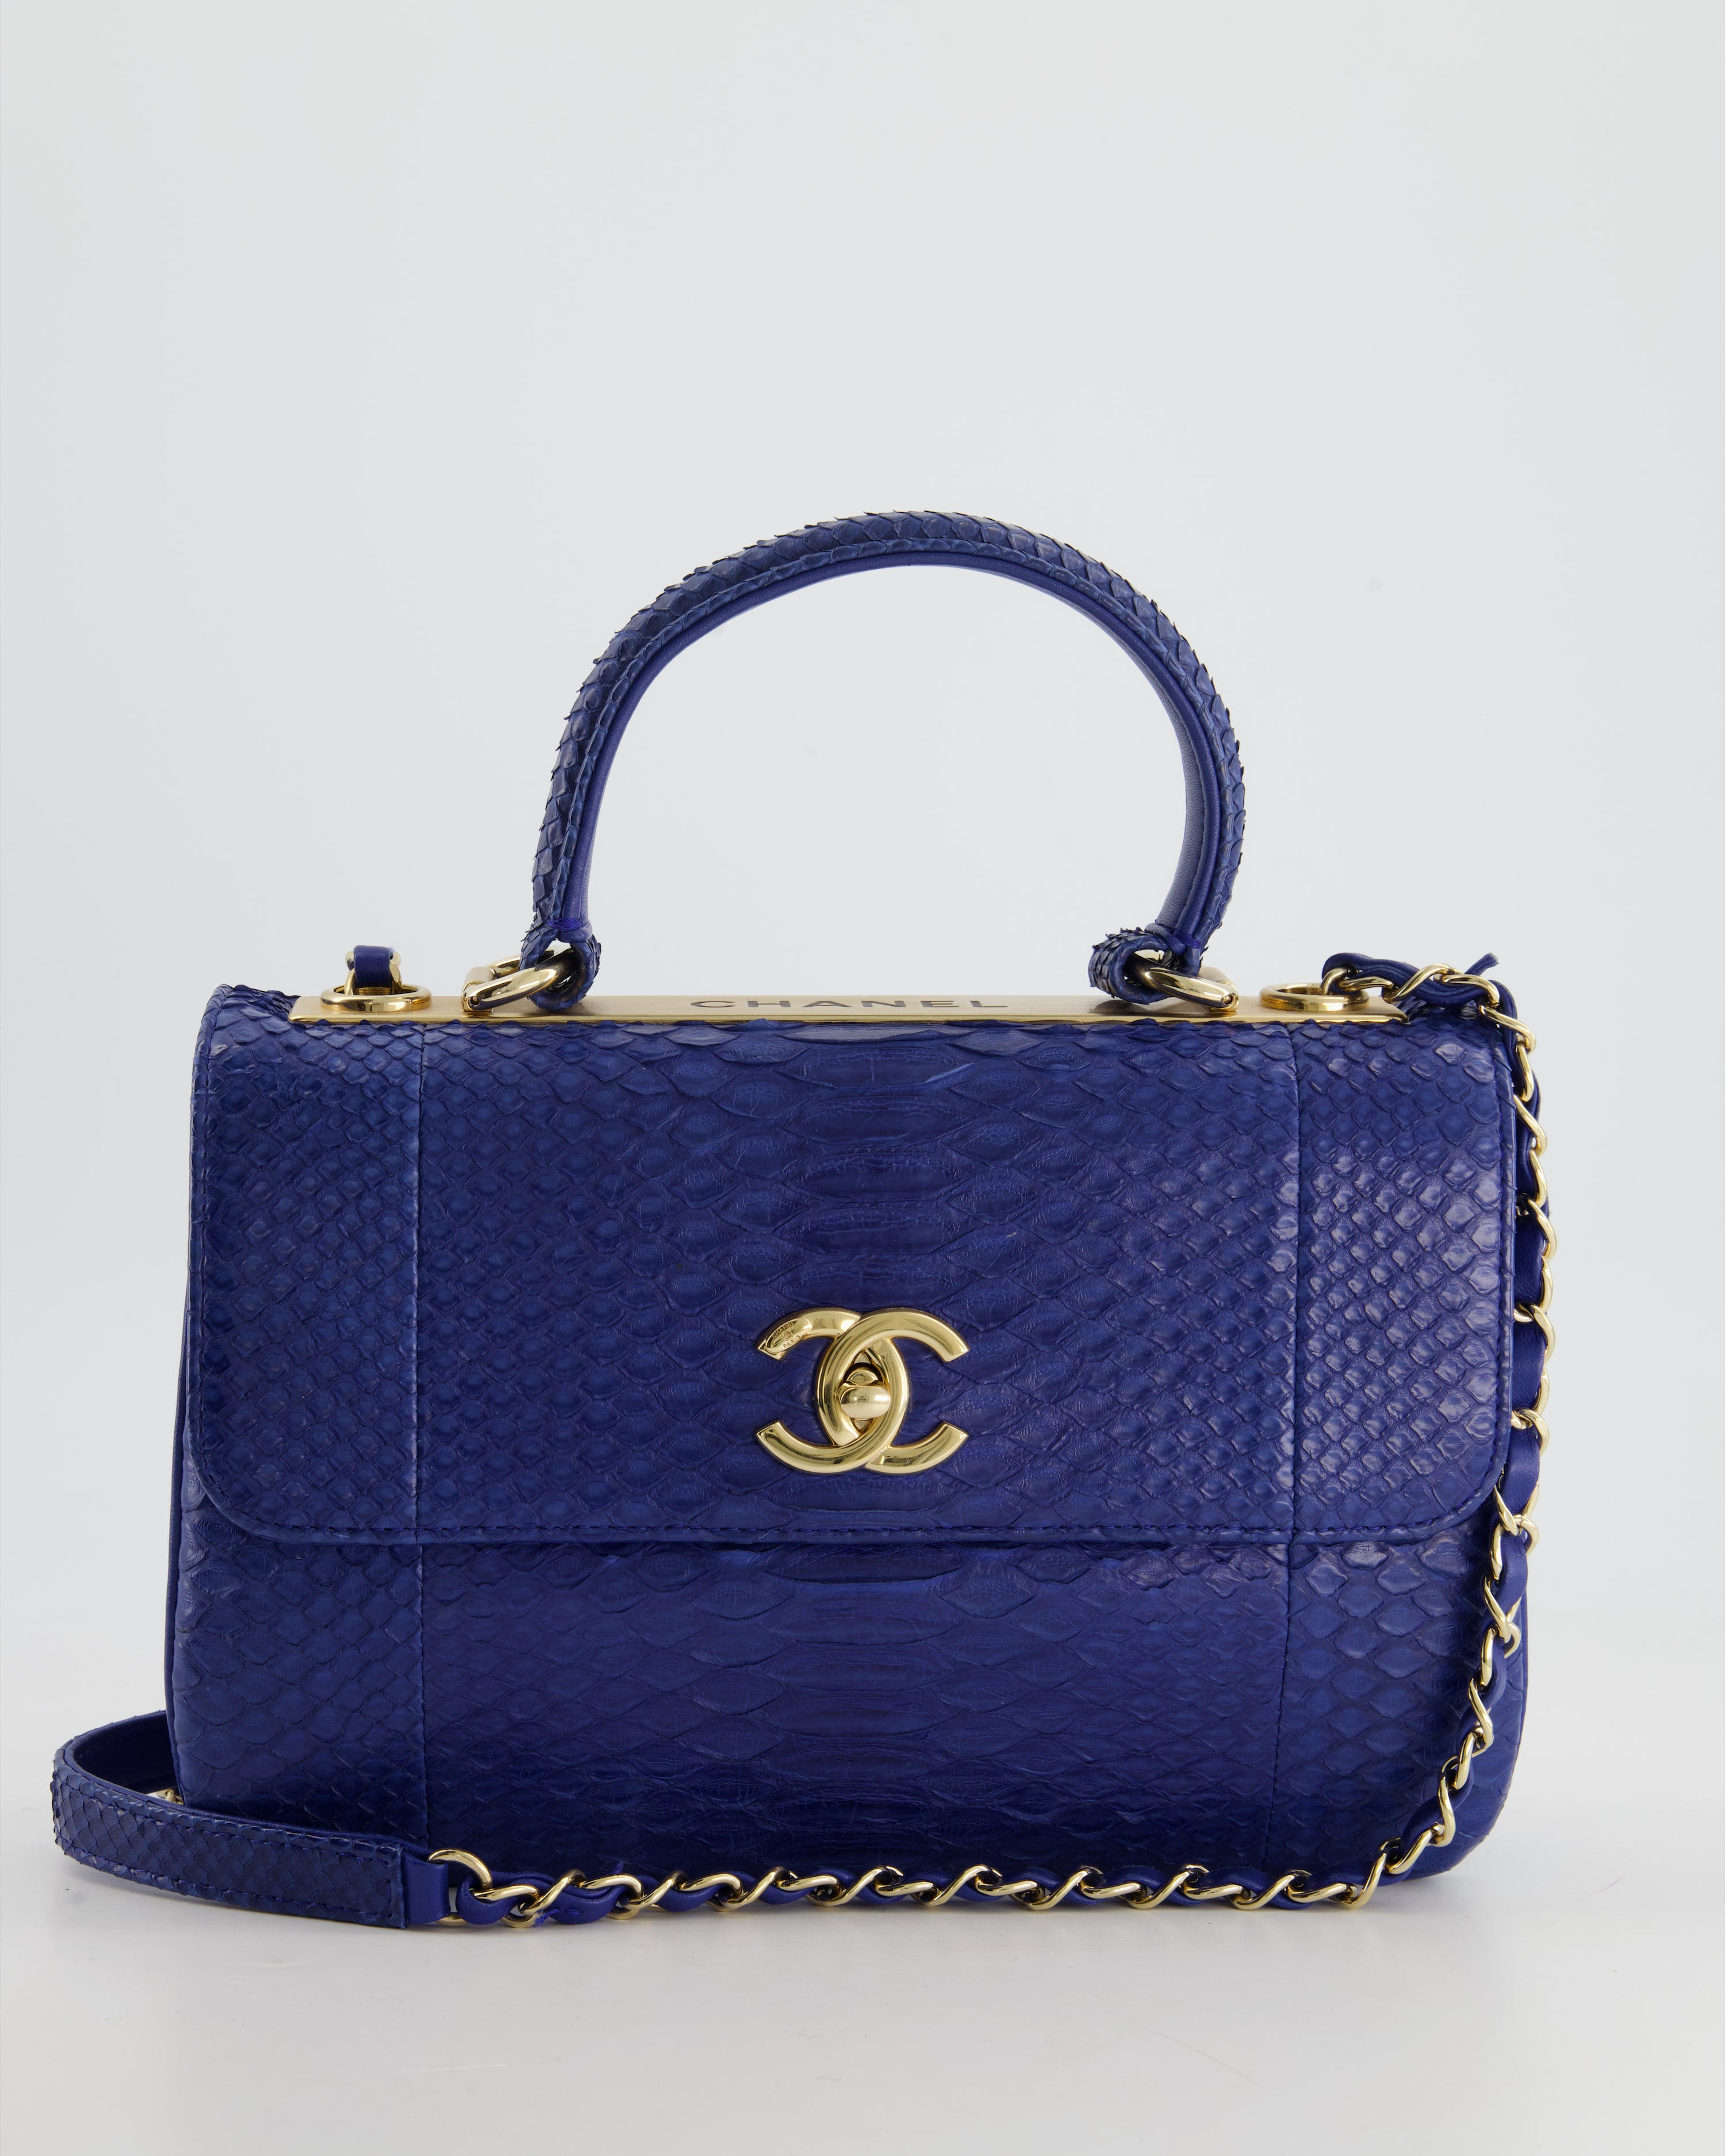 Naughtipidgins Nest  Chanel Easy Medium Tote in Cobalt Blue Caviar with  Shiny Silver Hardware An incredible intense and vibrant electric blue  shade this simple slim and lightweight Easy tote is just